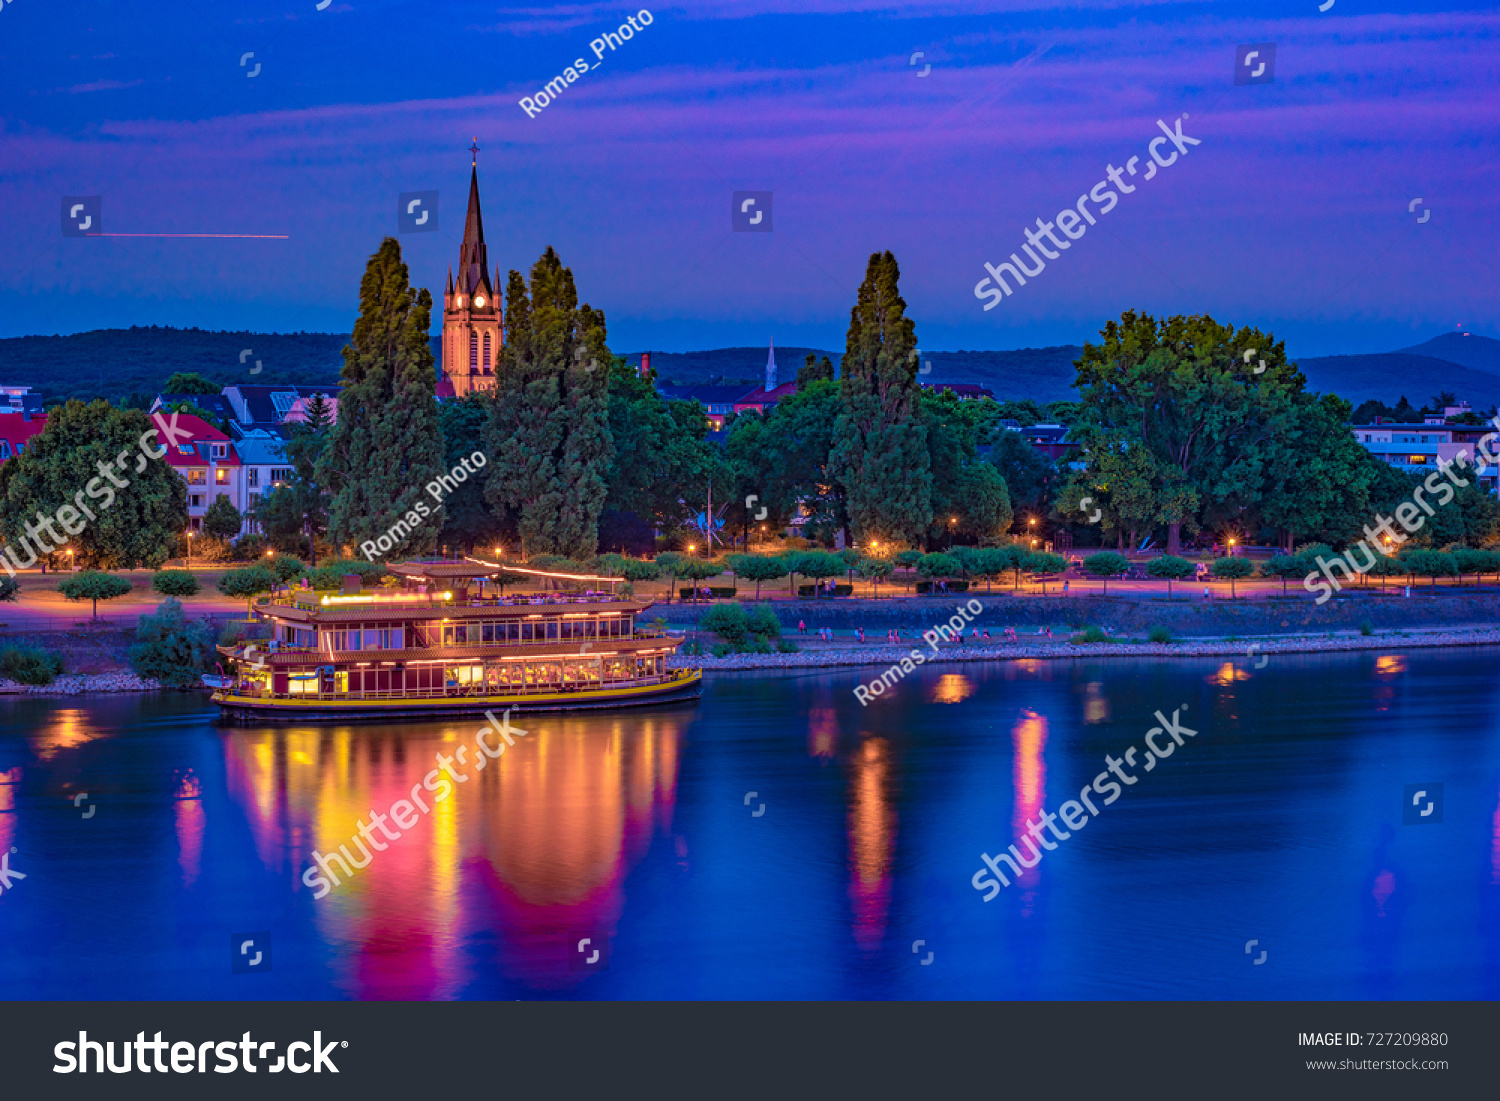 Skyline of Bonn, Germany. Beautiful night shot of great german city. Panorama with boat, trees, and historic architecture reflected in the water. #727209880